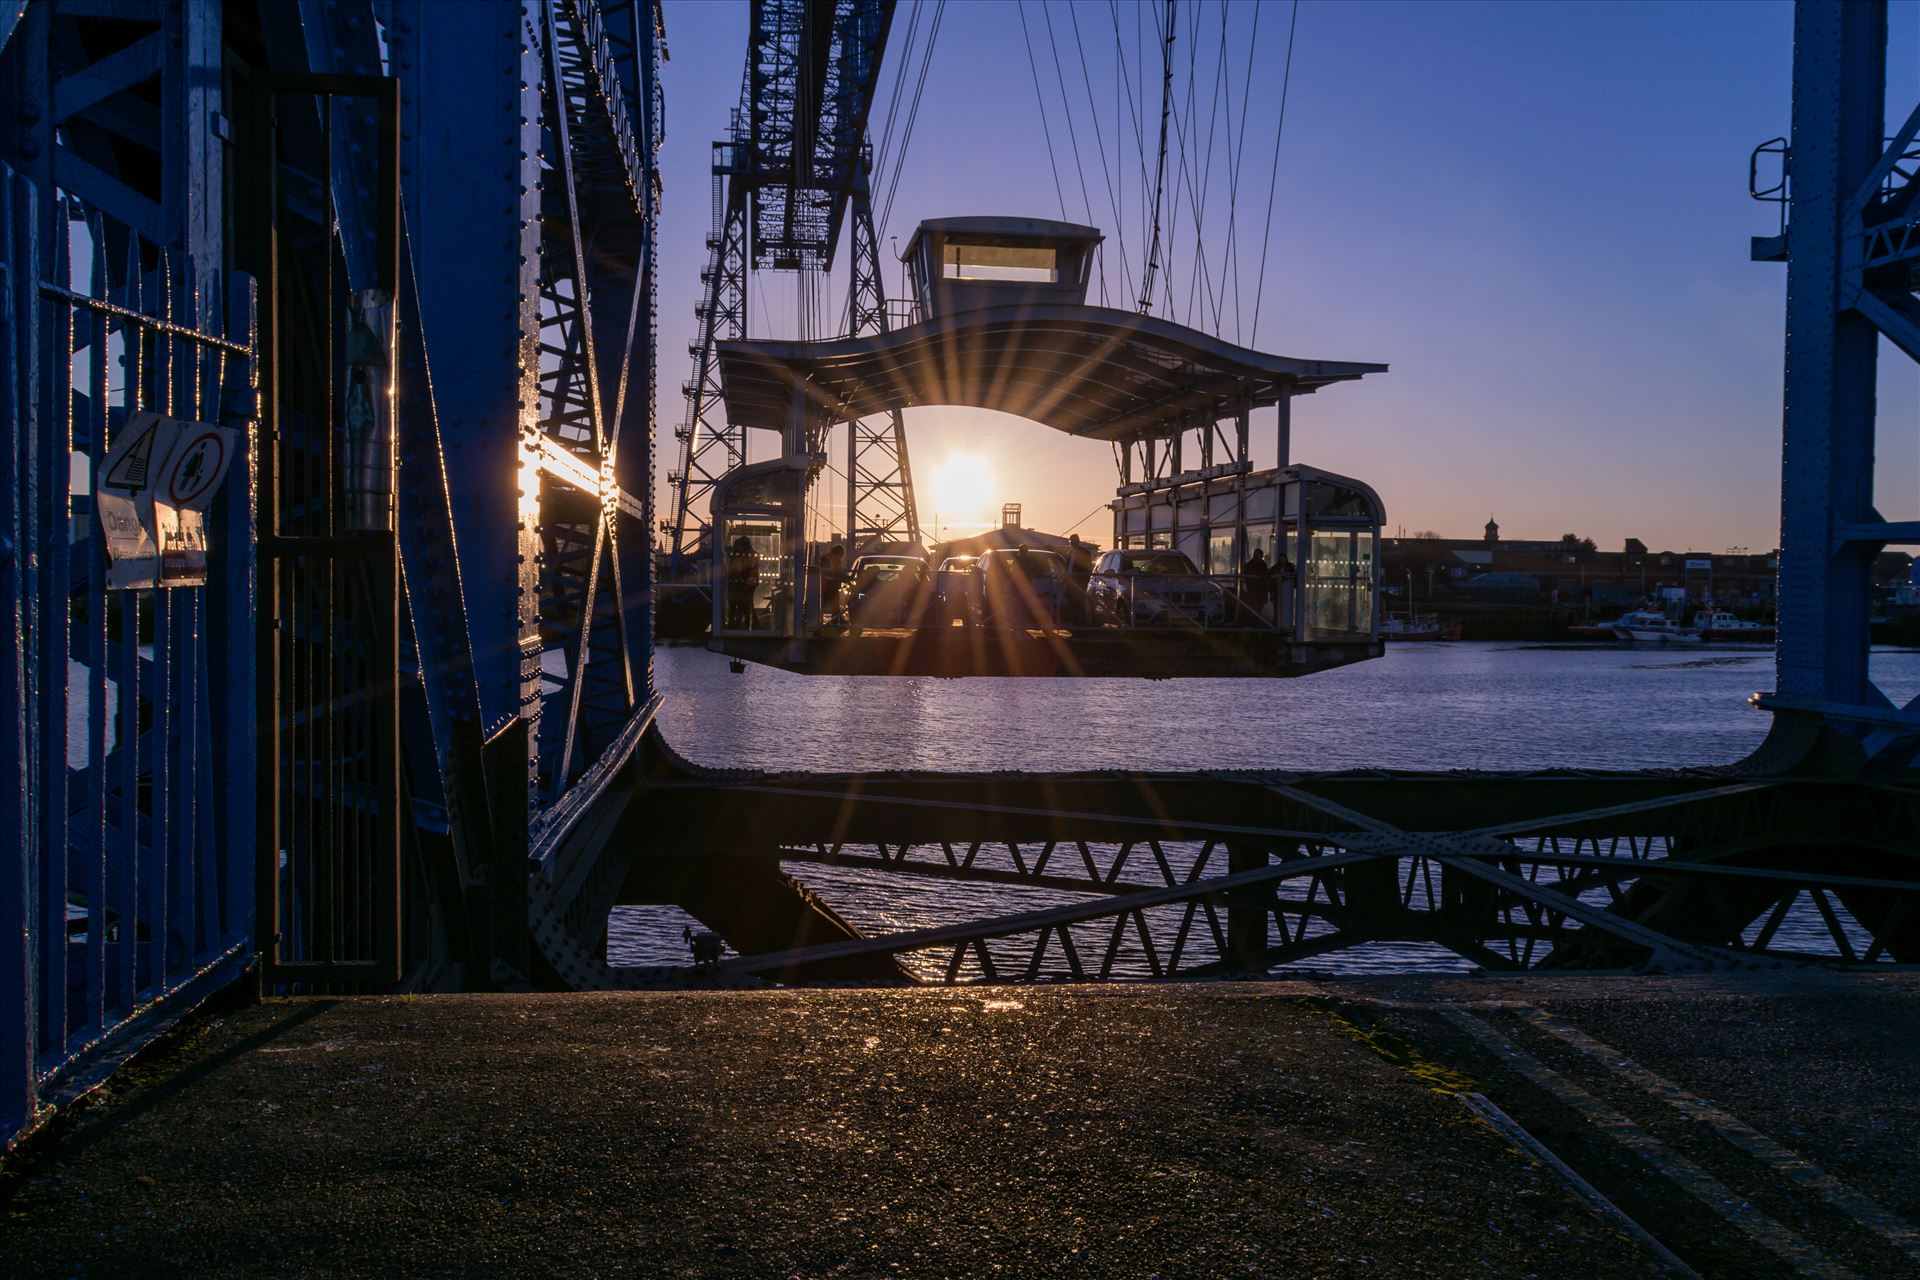 Transporter Bridge Port Clarence Sun Set - Taken on the 29/12/17 on a cold winters evening, To buy this image or many more of this iconic bridge, follow the link
https://www.clickasnap.com/i/2g1kgrkbmzmreihh by AJ Stoves Photography